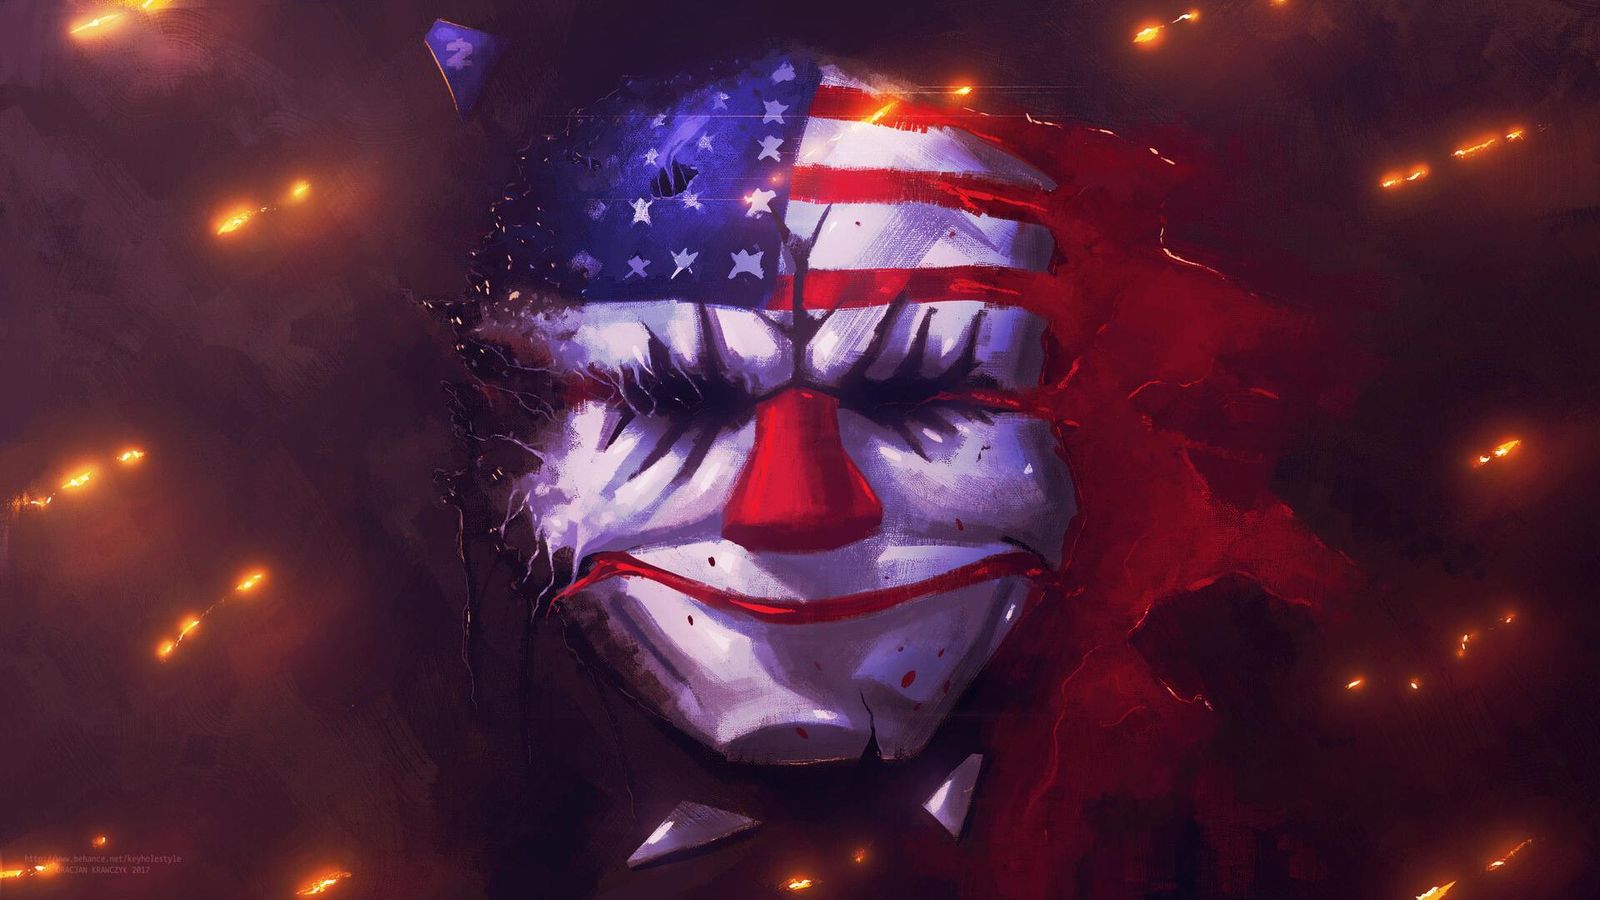 How to hack in Payday 3 - picture of the mask of Dallas